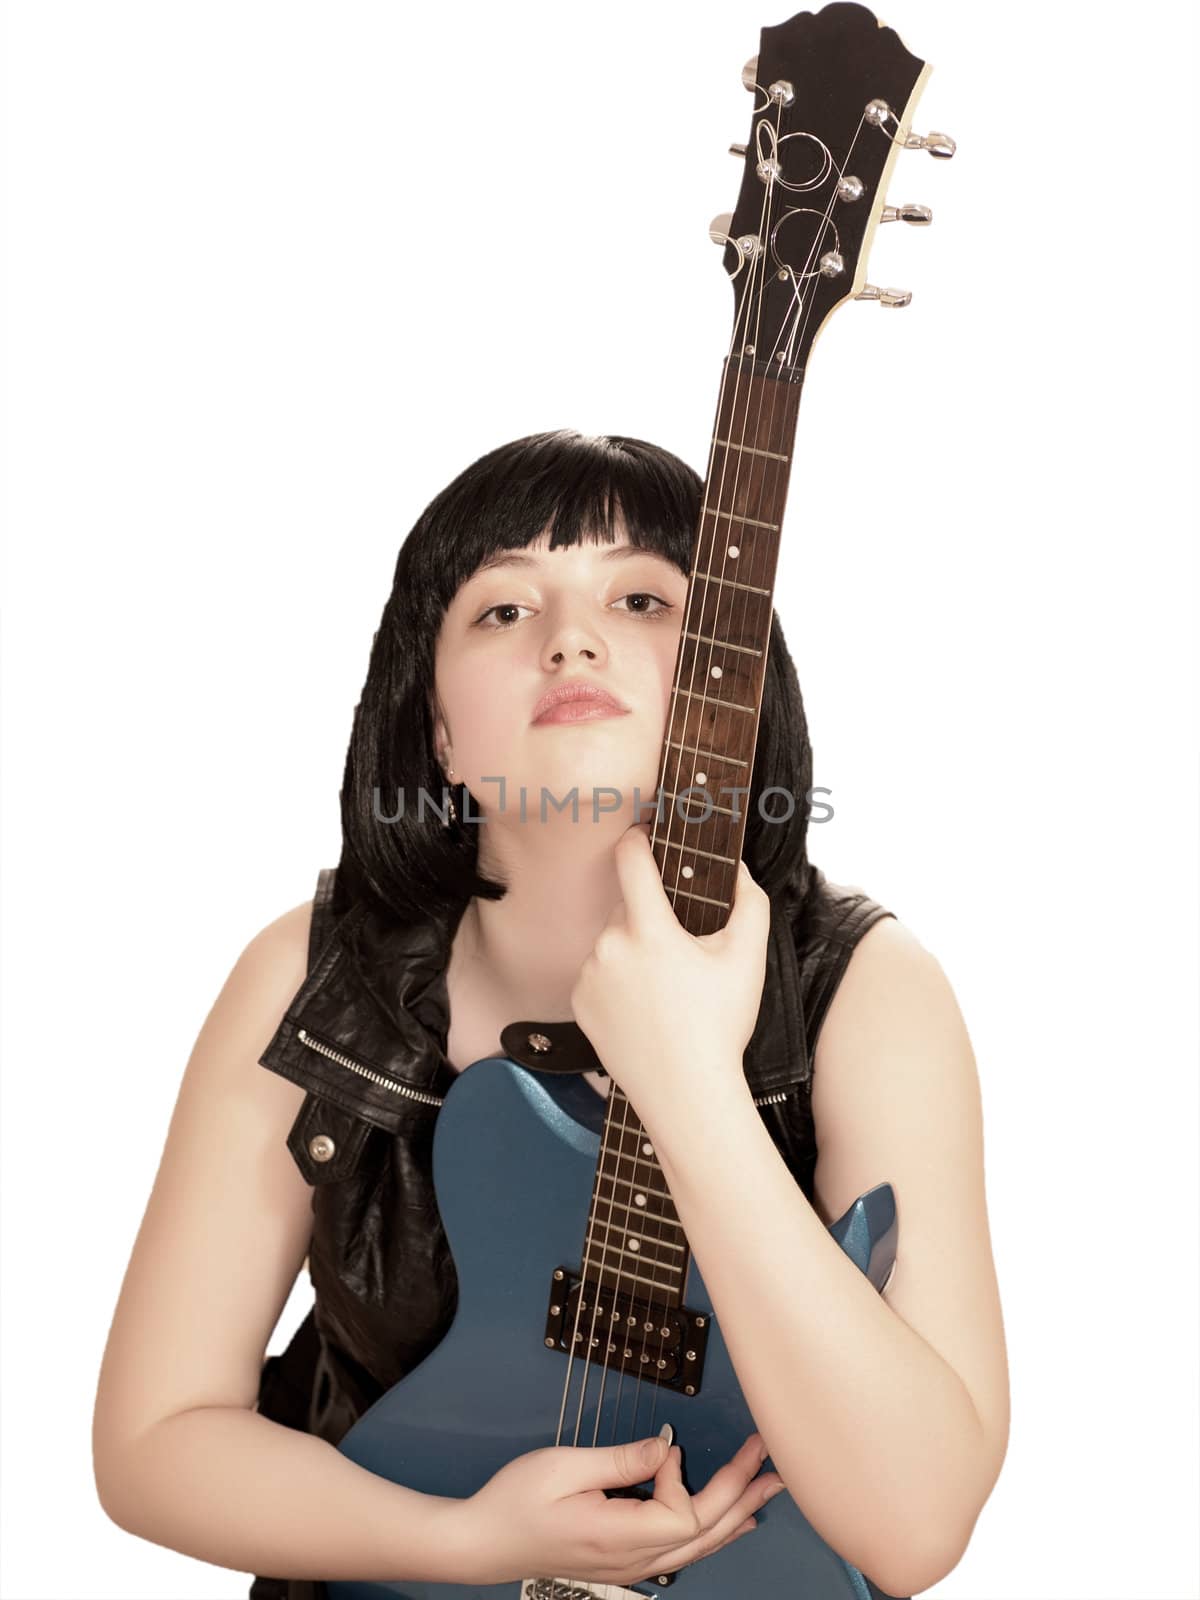 Young woman with electric guitar by DeusNoxious